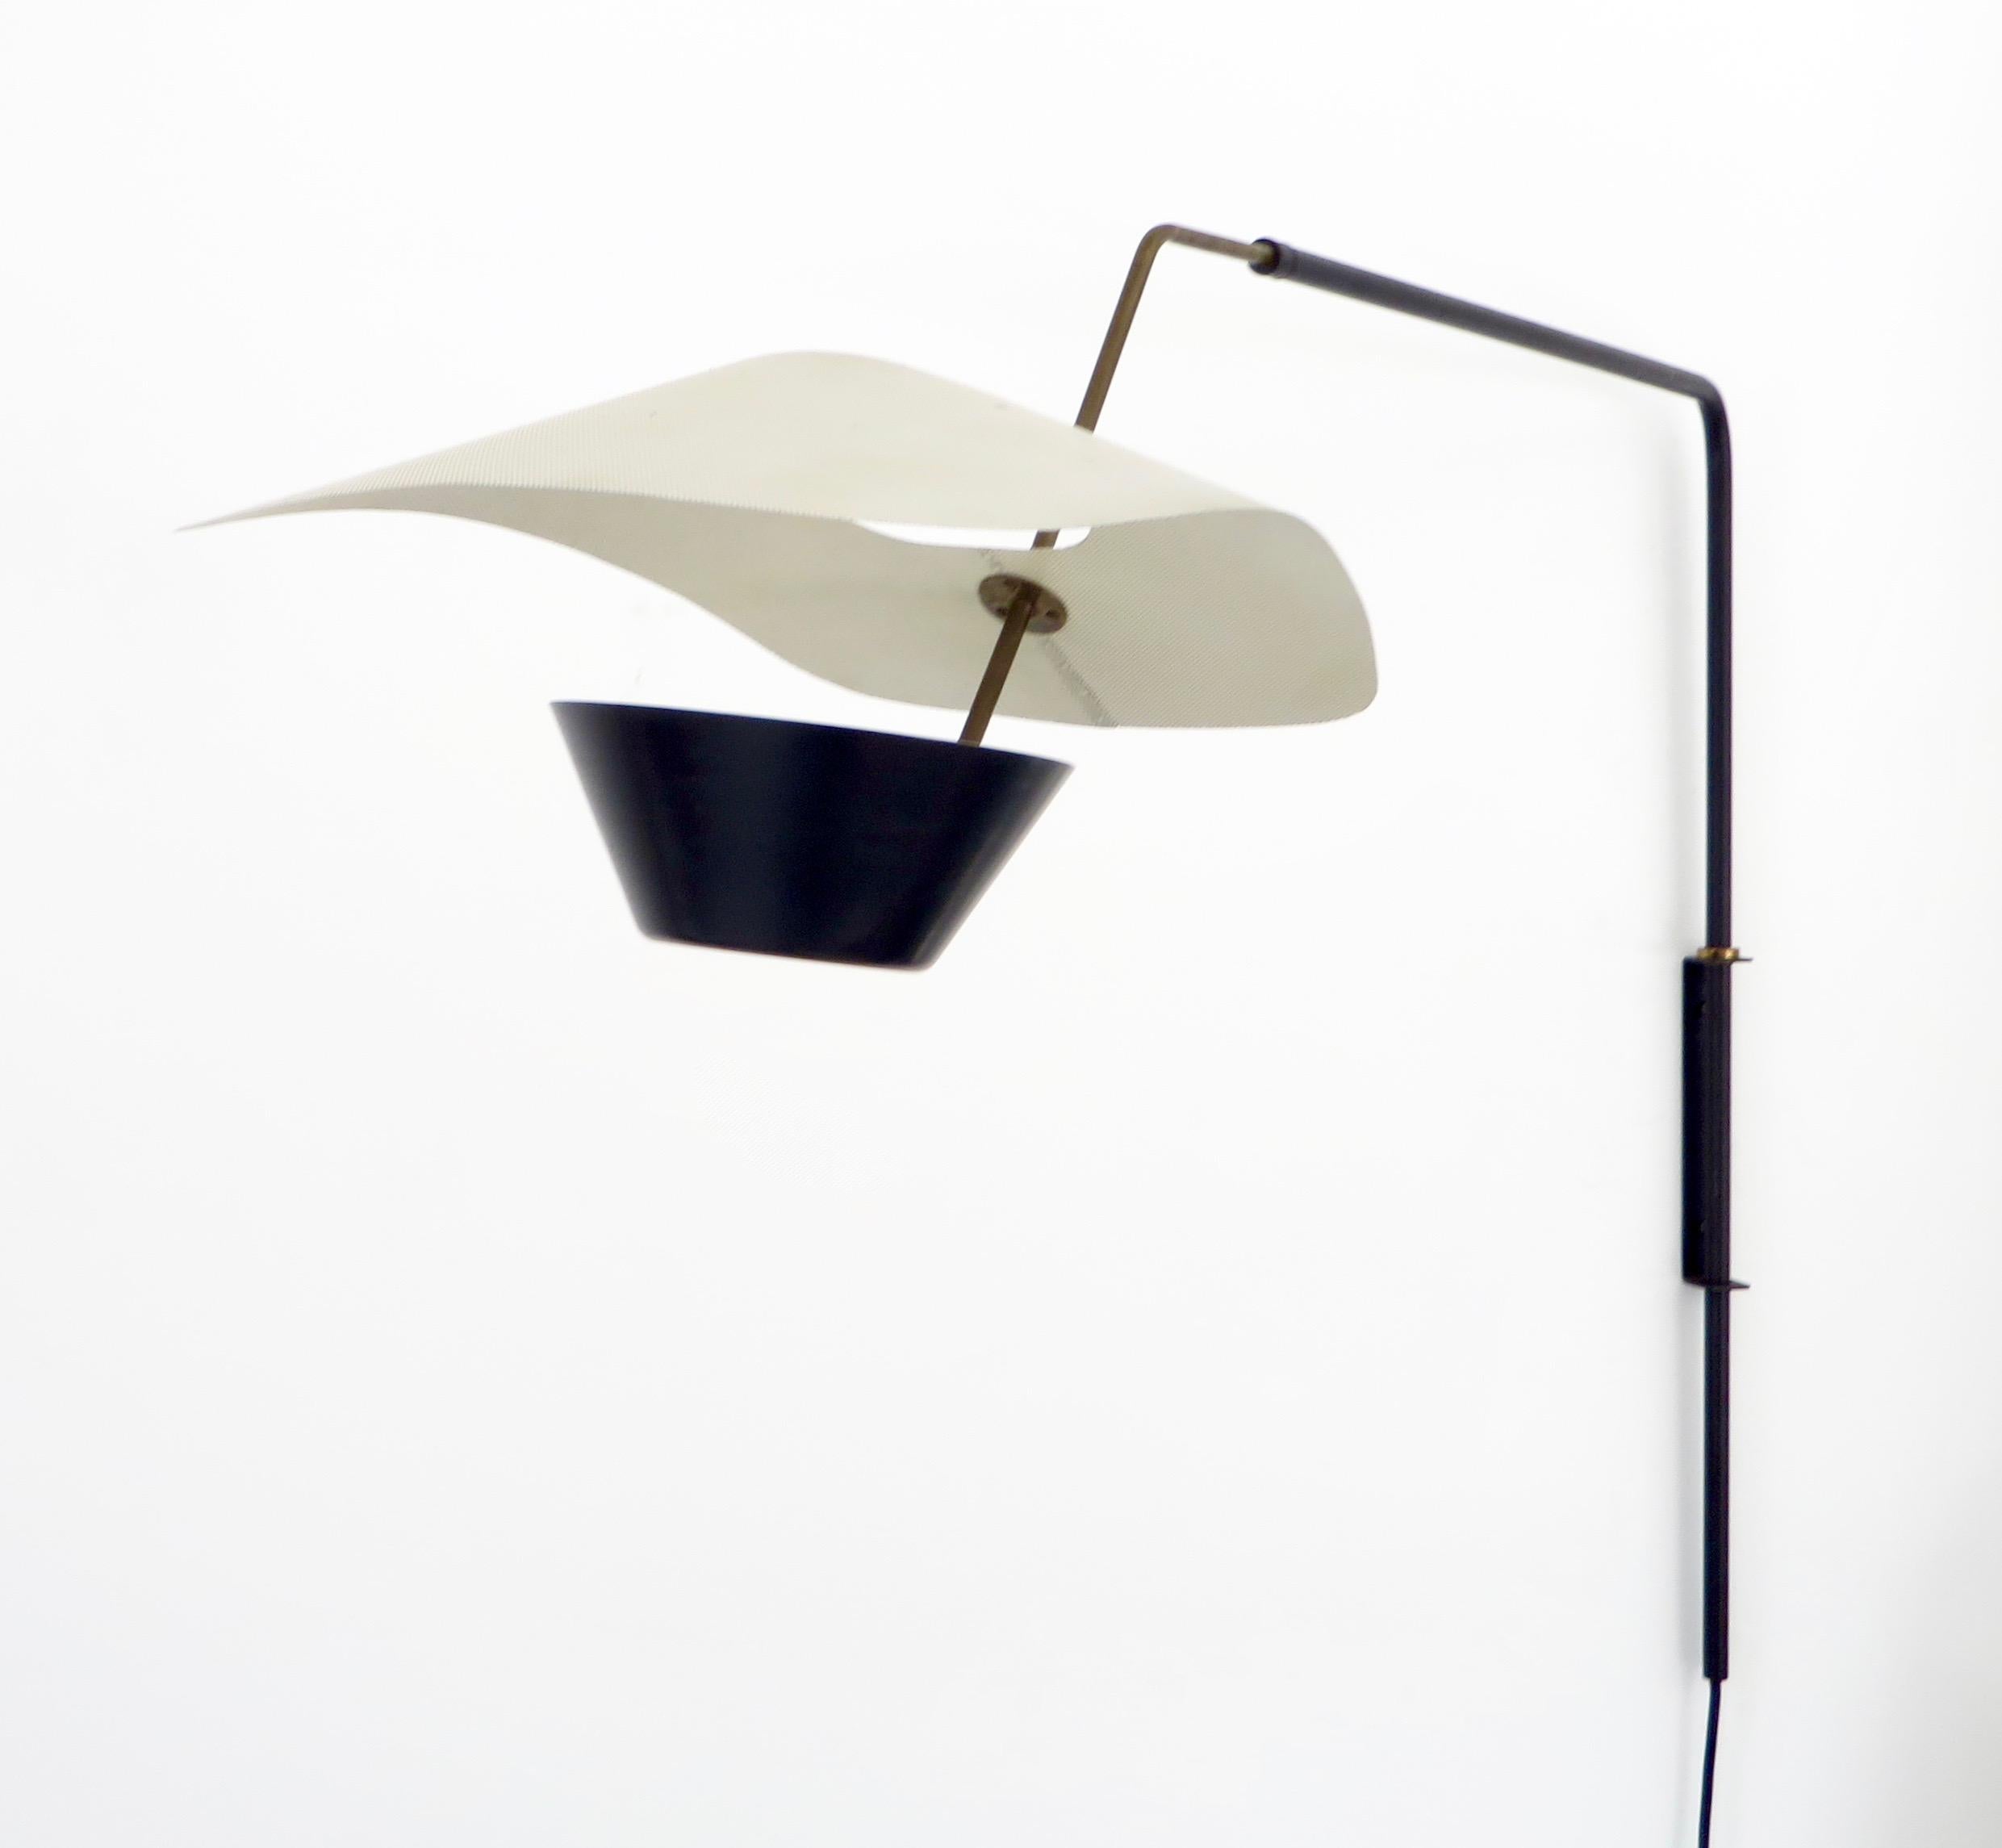 French Kite Cerf Volant Applique Wall Light by Pierre Guariche Editioned by Disderot